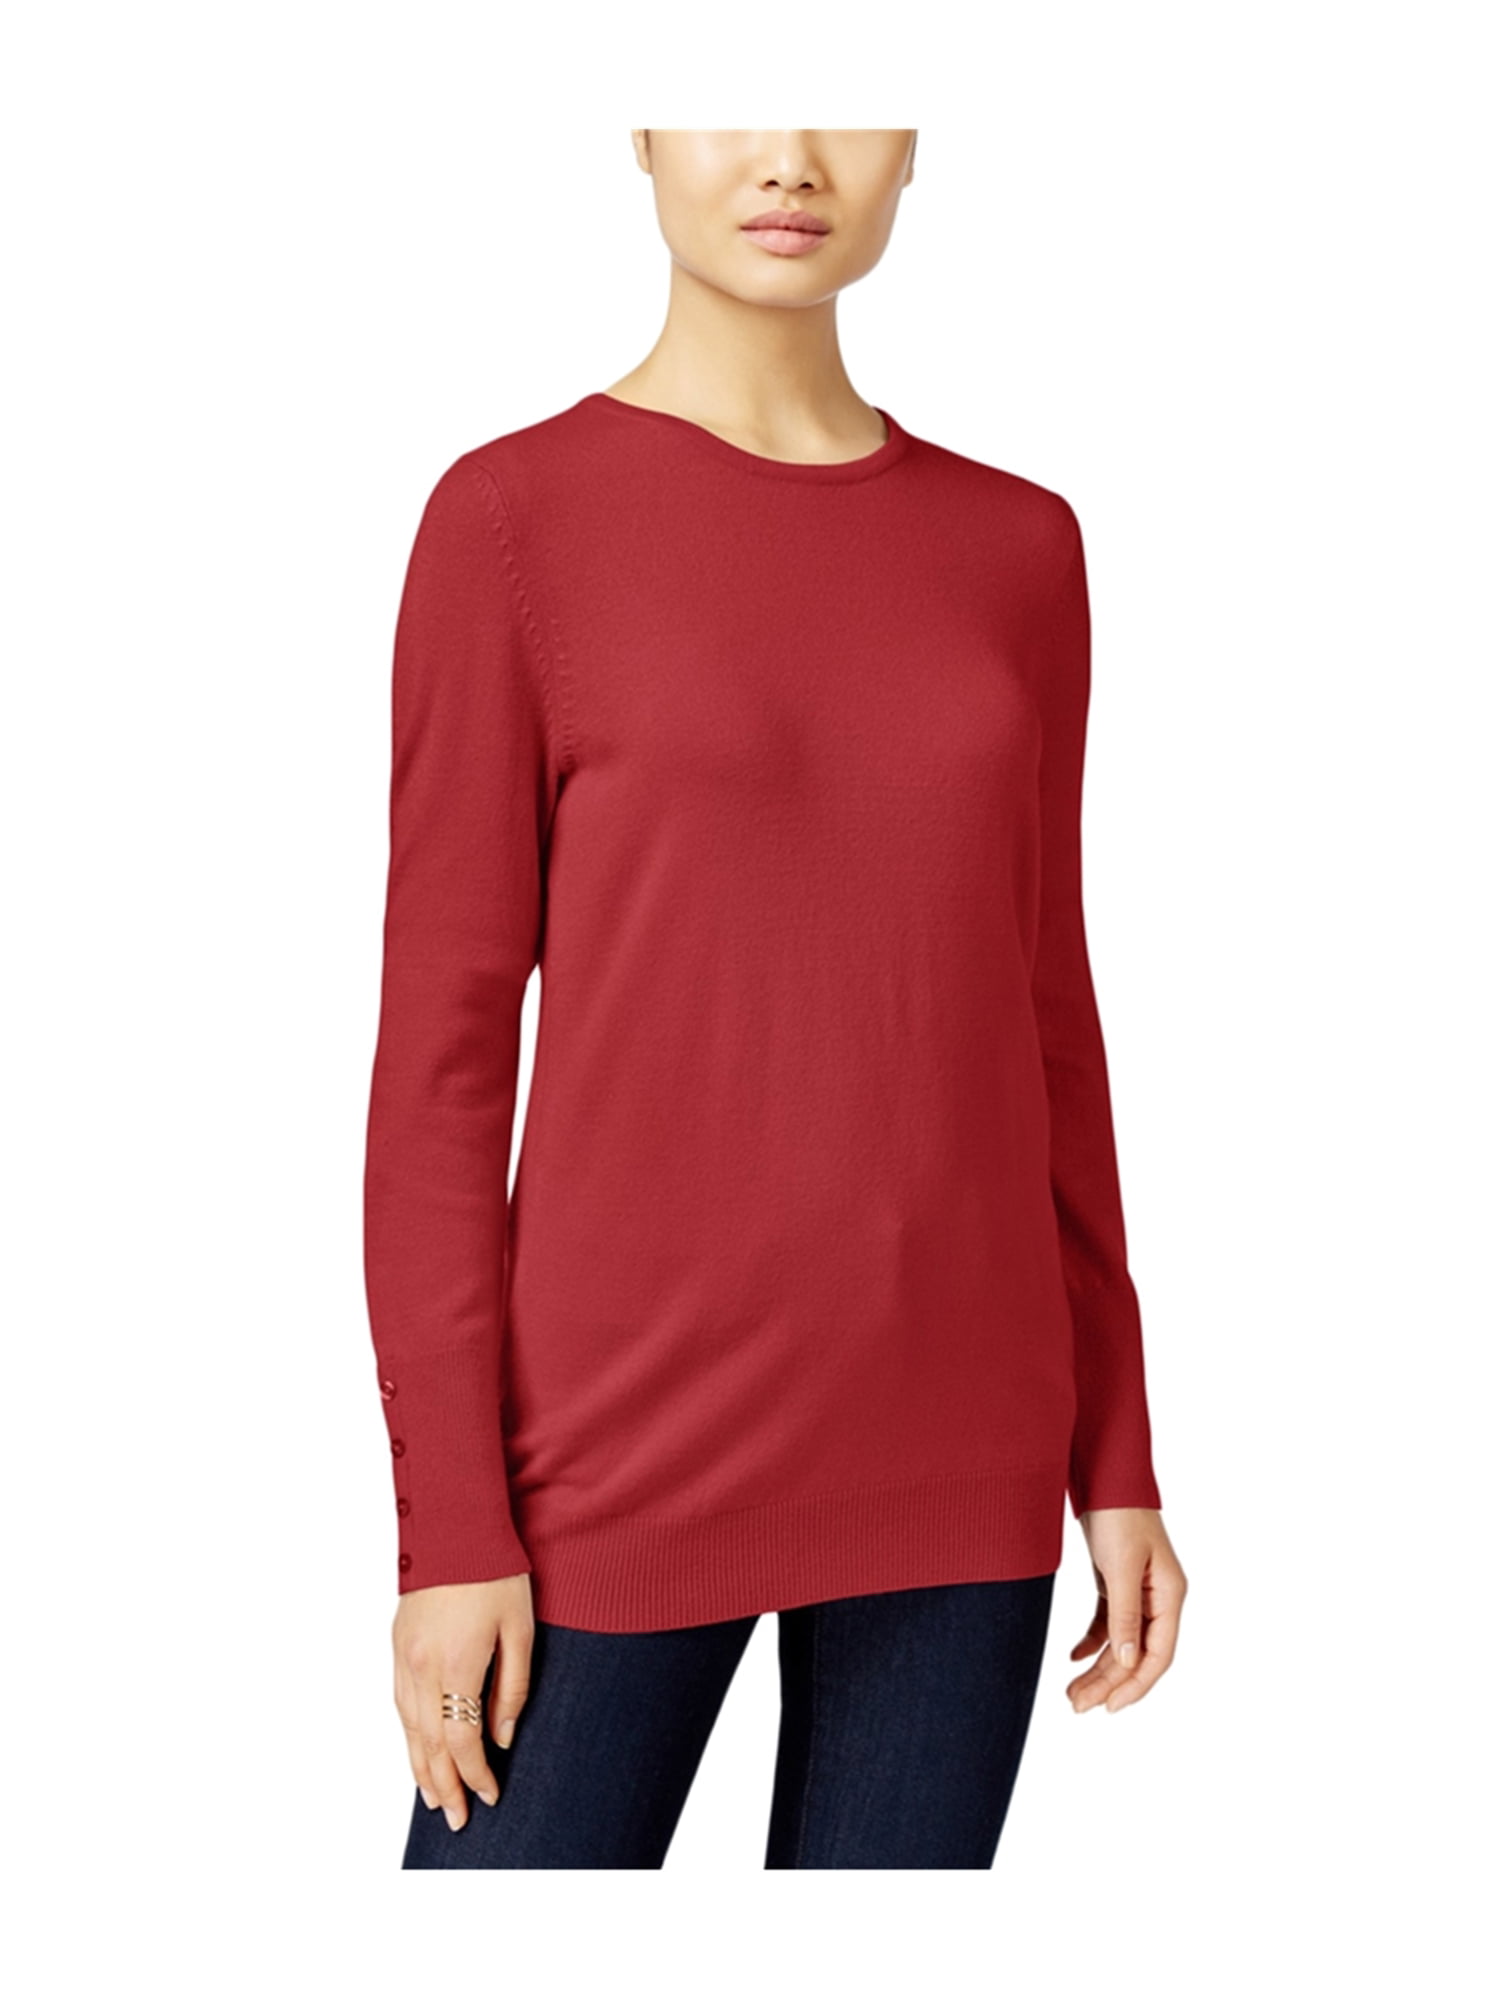 JM Collection - JM Collection Womens Knit Pullover Sweater newredamore ...